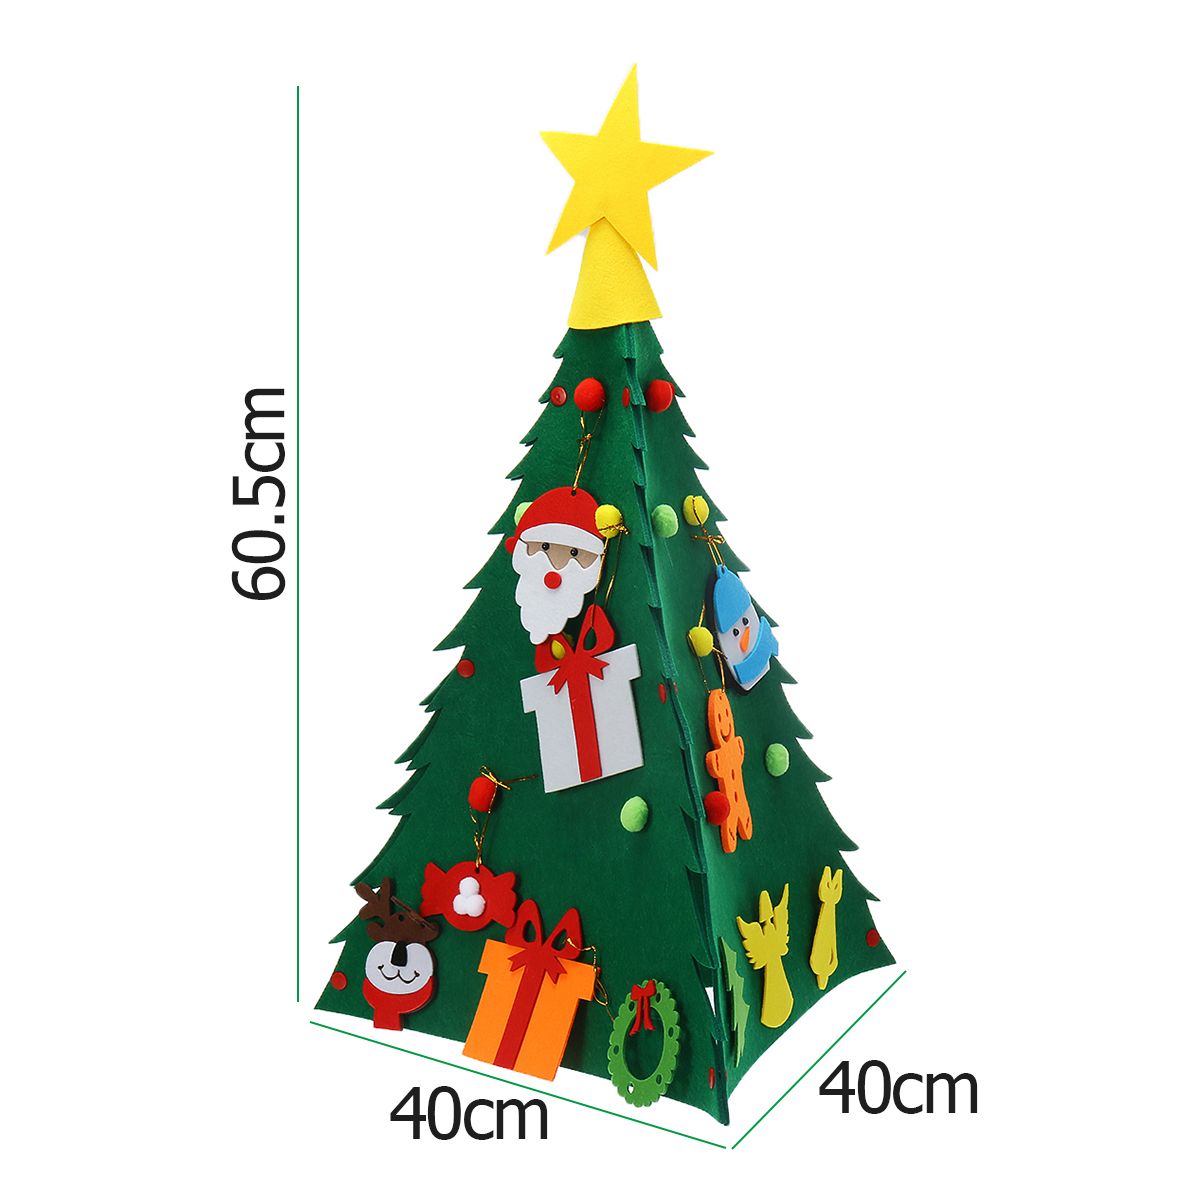 3D-DIY-Toddler-Christmas-Tree-Decorations-New-Year-Kids-Children-Toys-Xmas-Gift-1596592